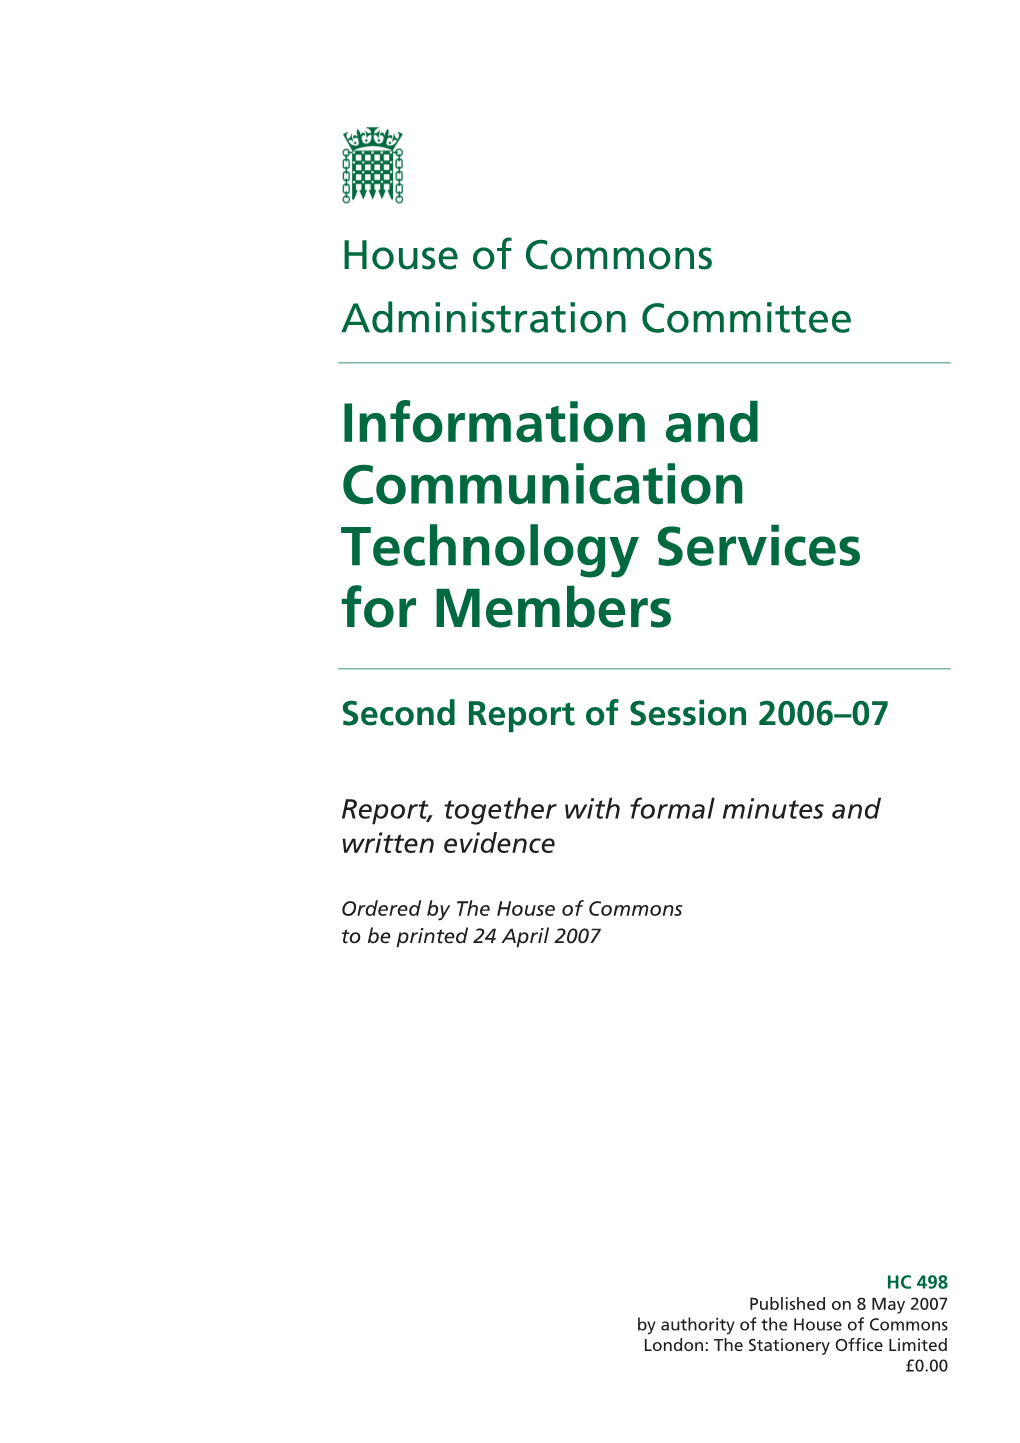 Information and Communication Technology Services for Members